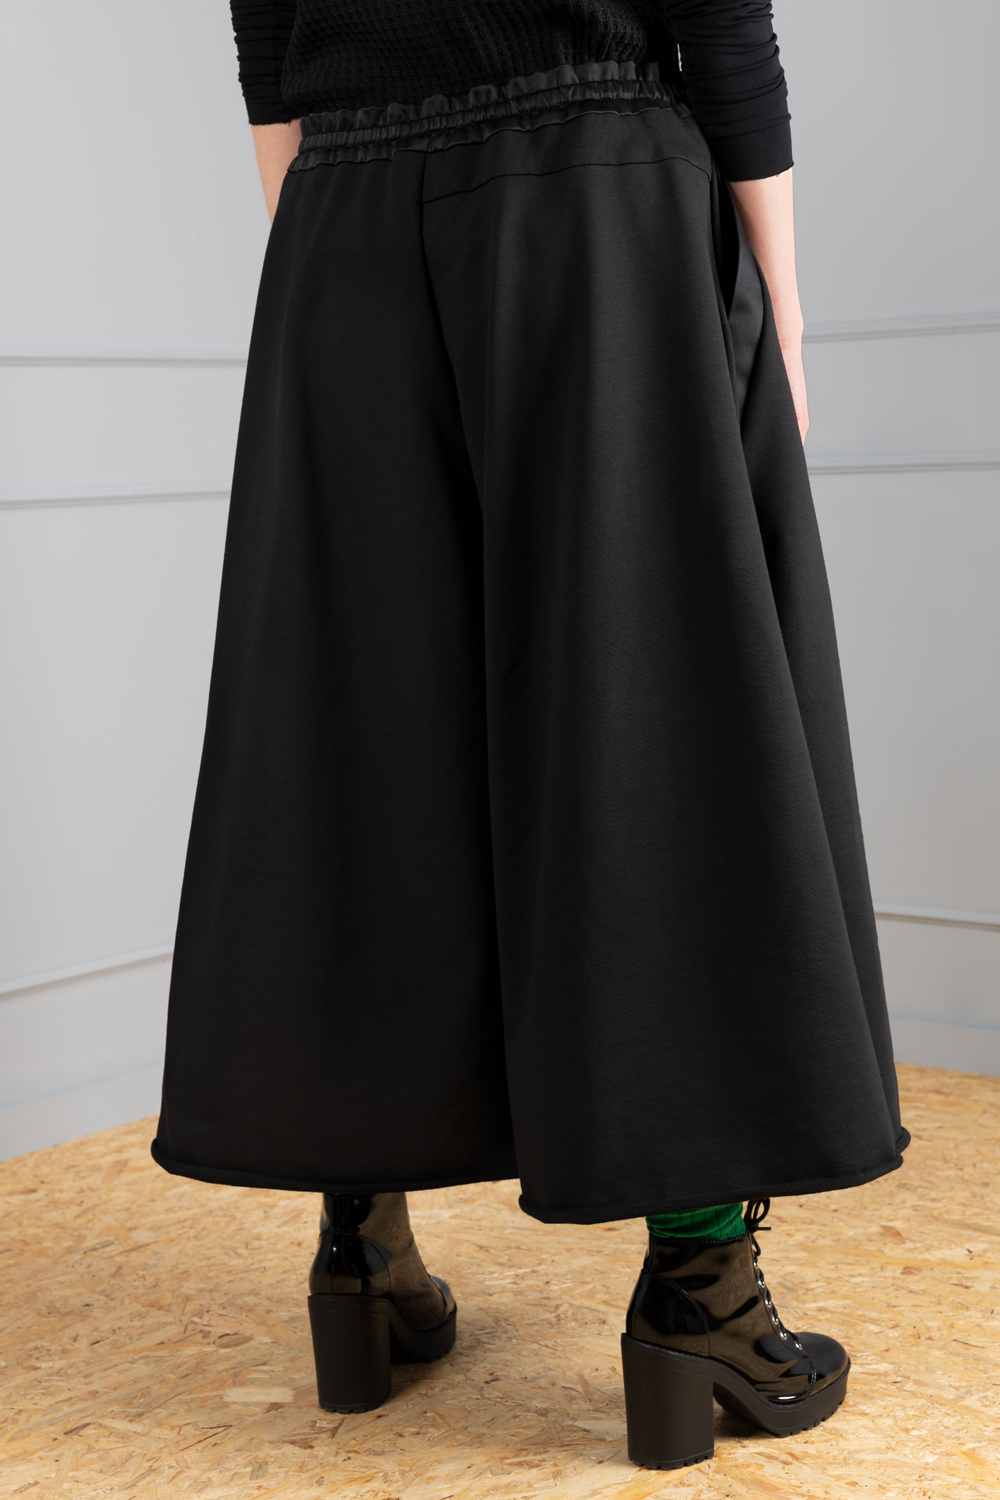 Black unisex skirt trousers for an eccentric look